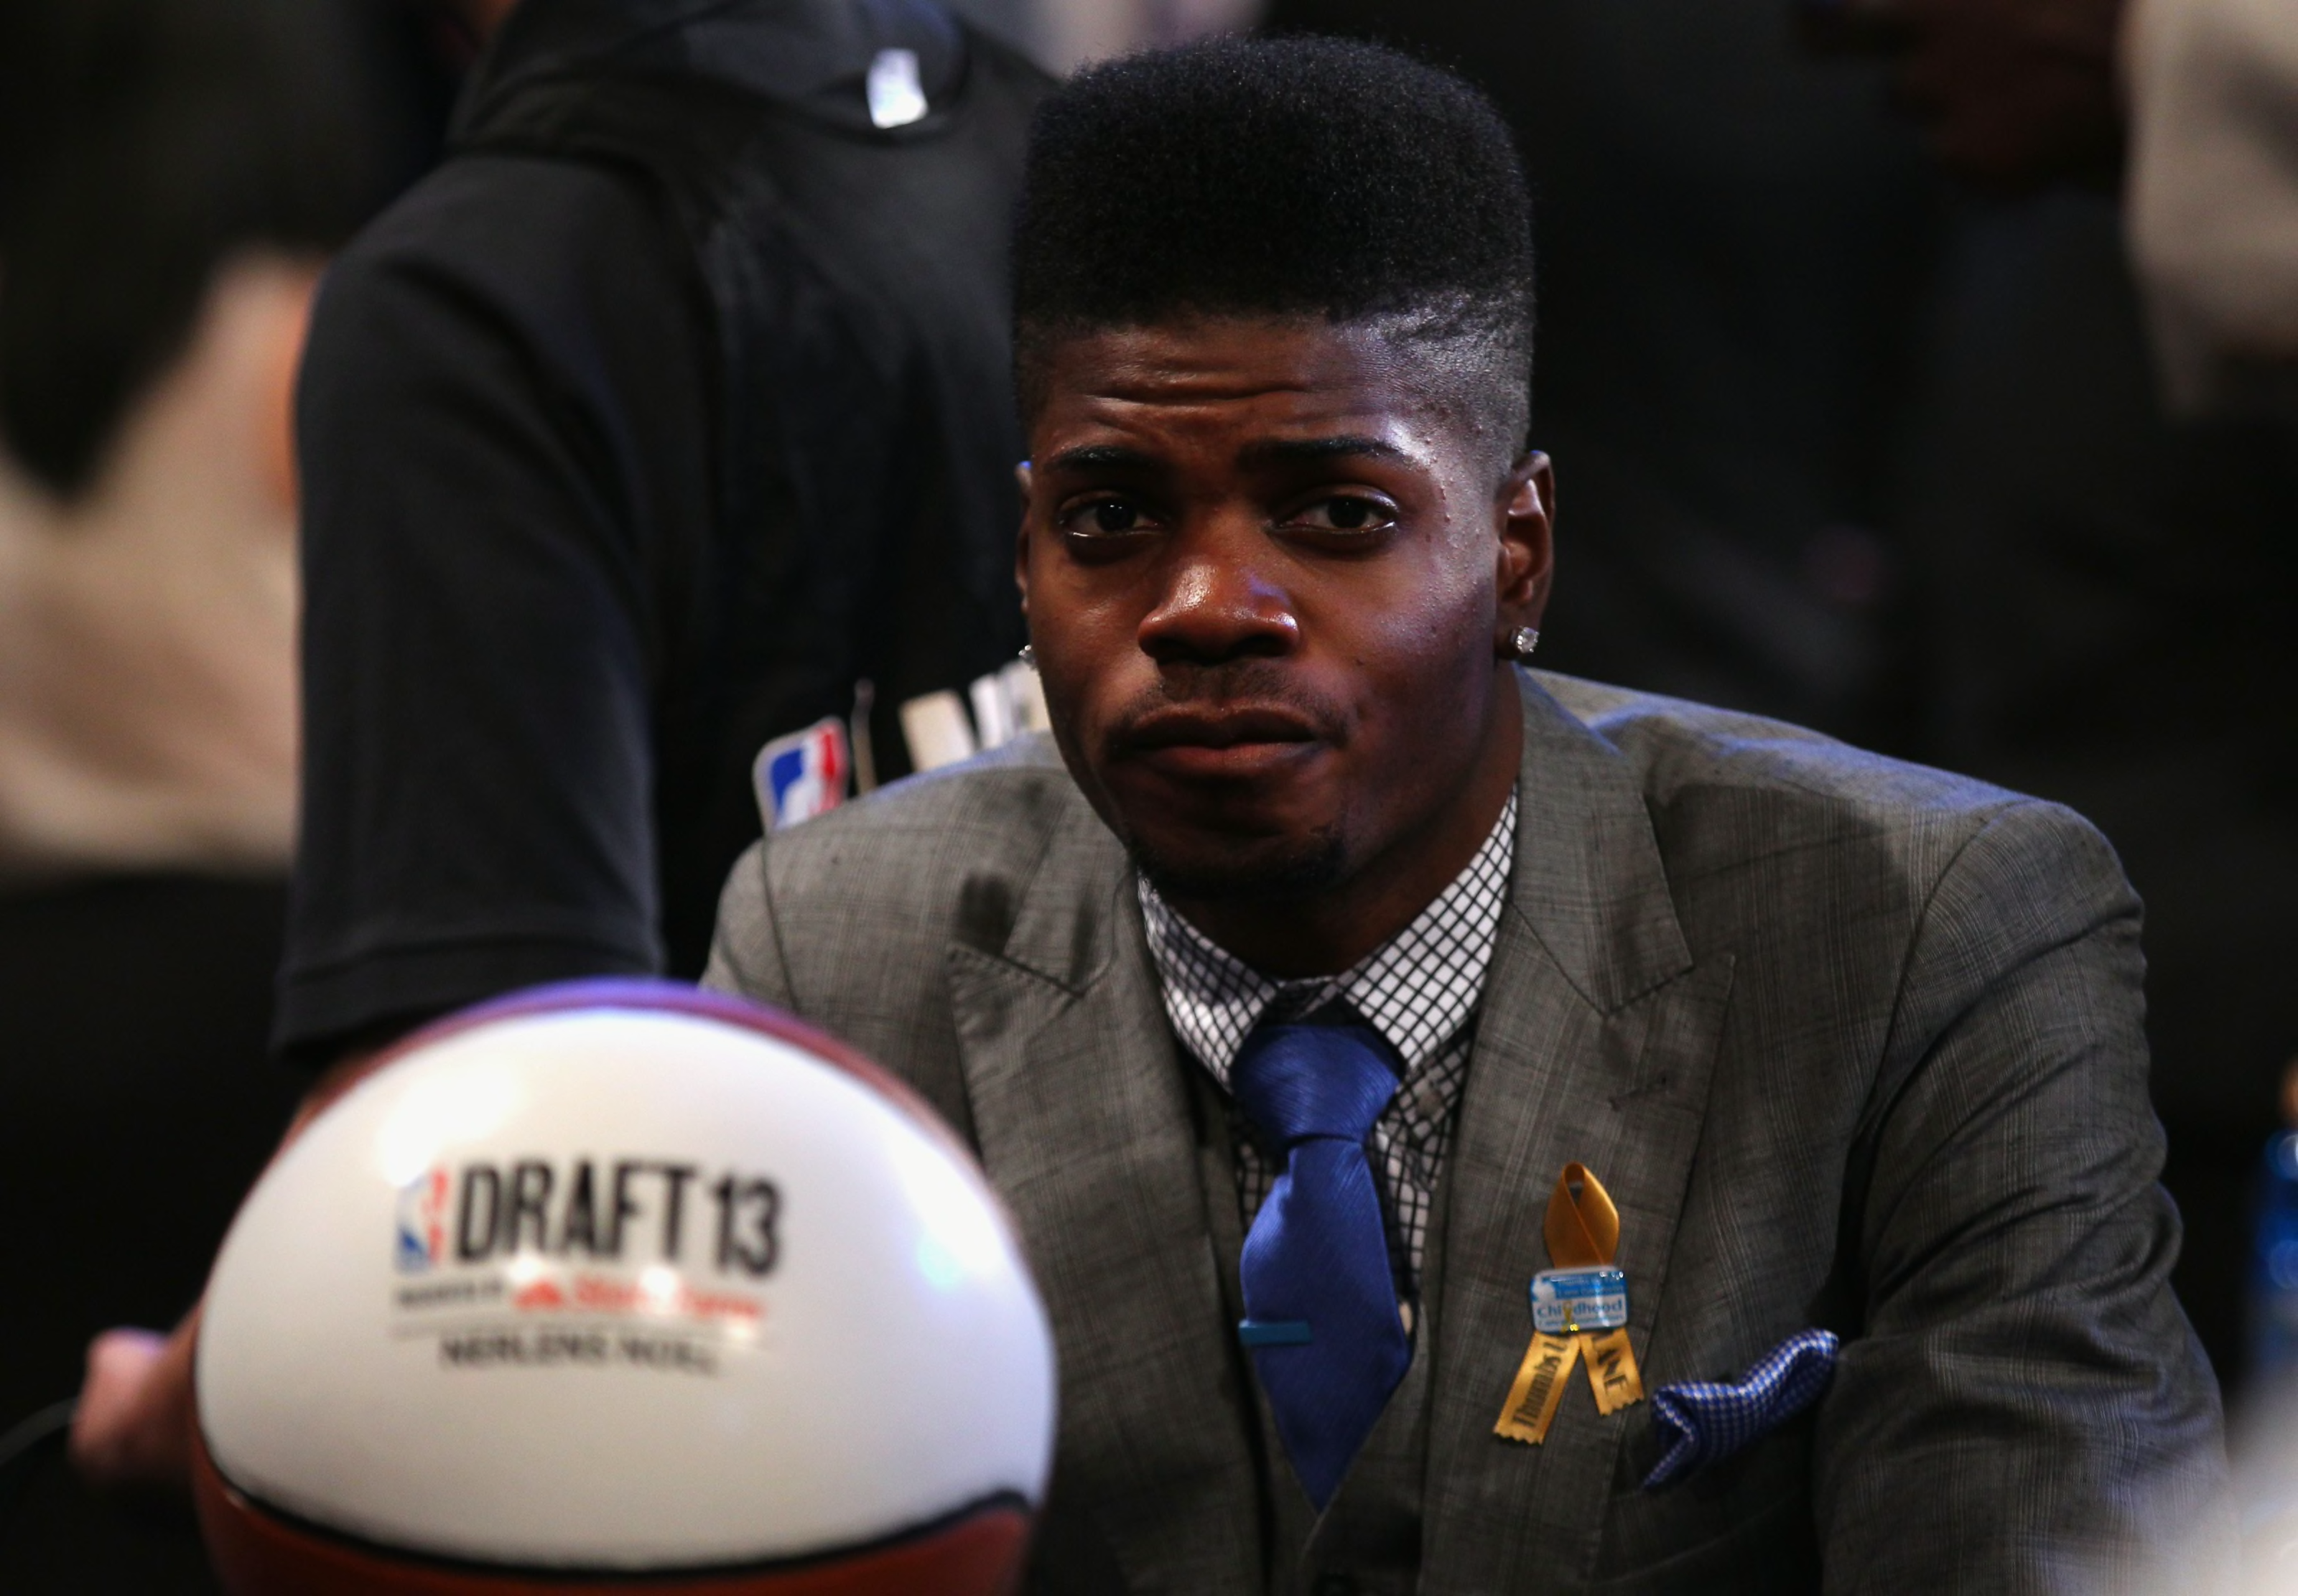 NBA Draft: 2013 historical redraft shows vast differences